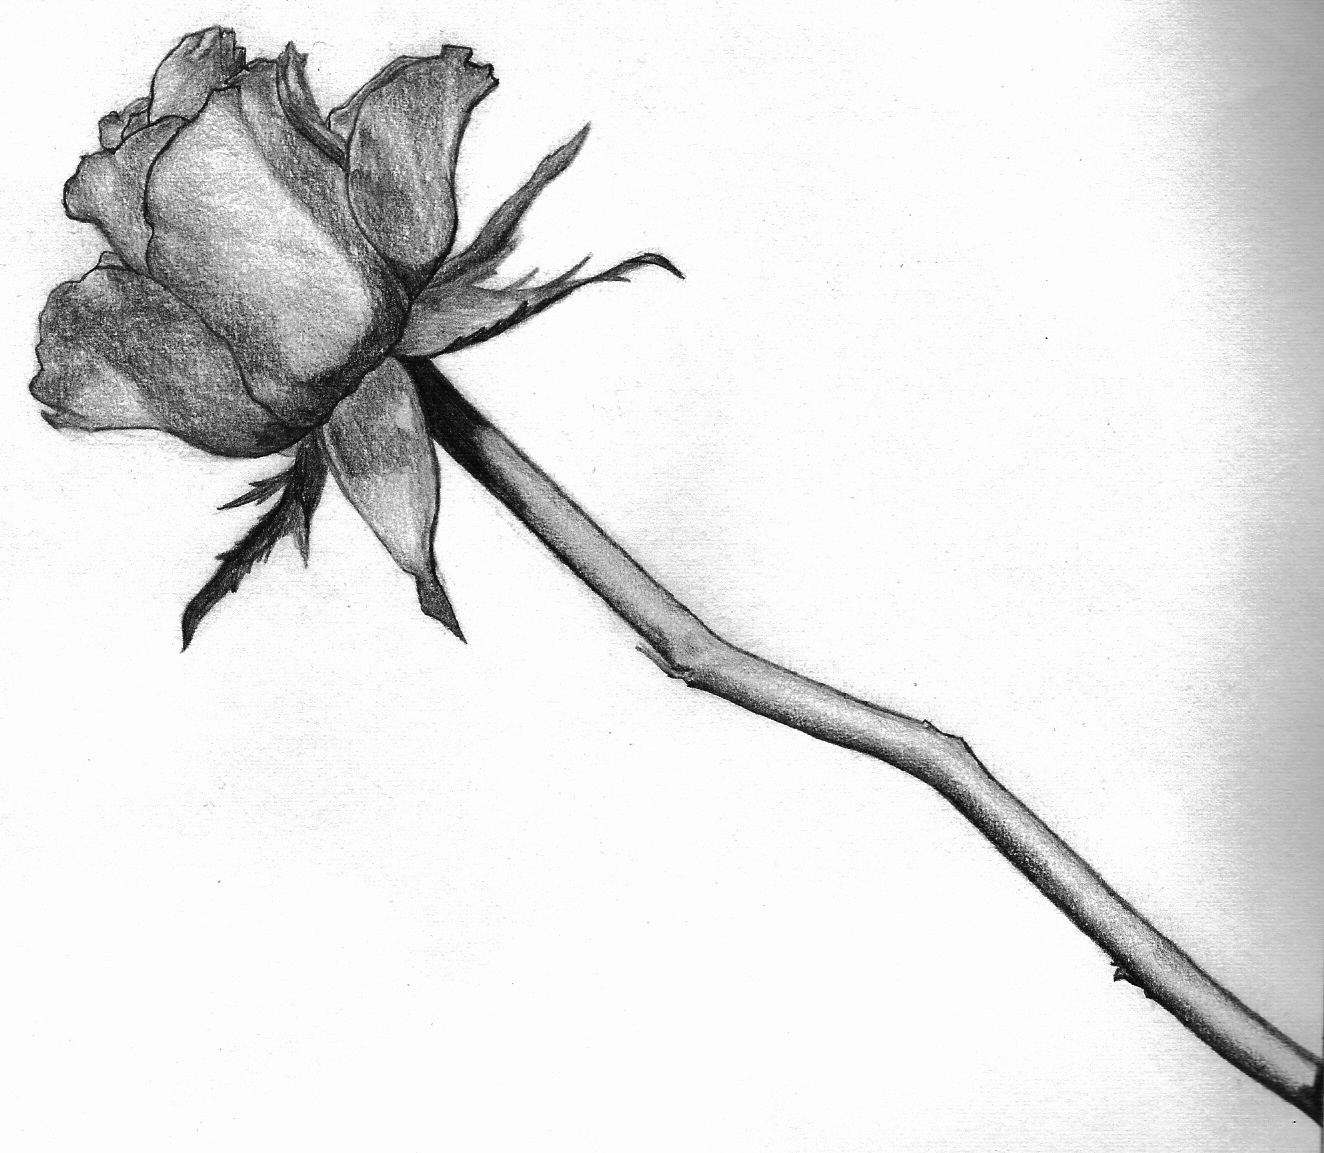 Black and White Rose by laura-20 on Clipart library